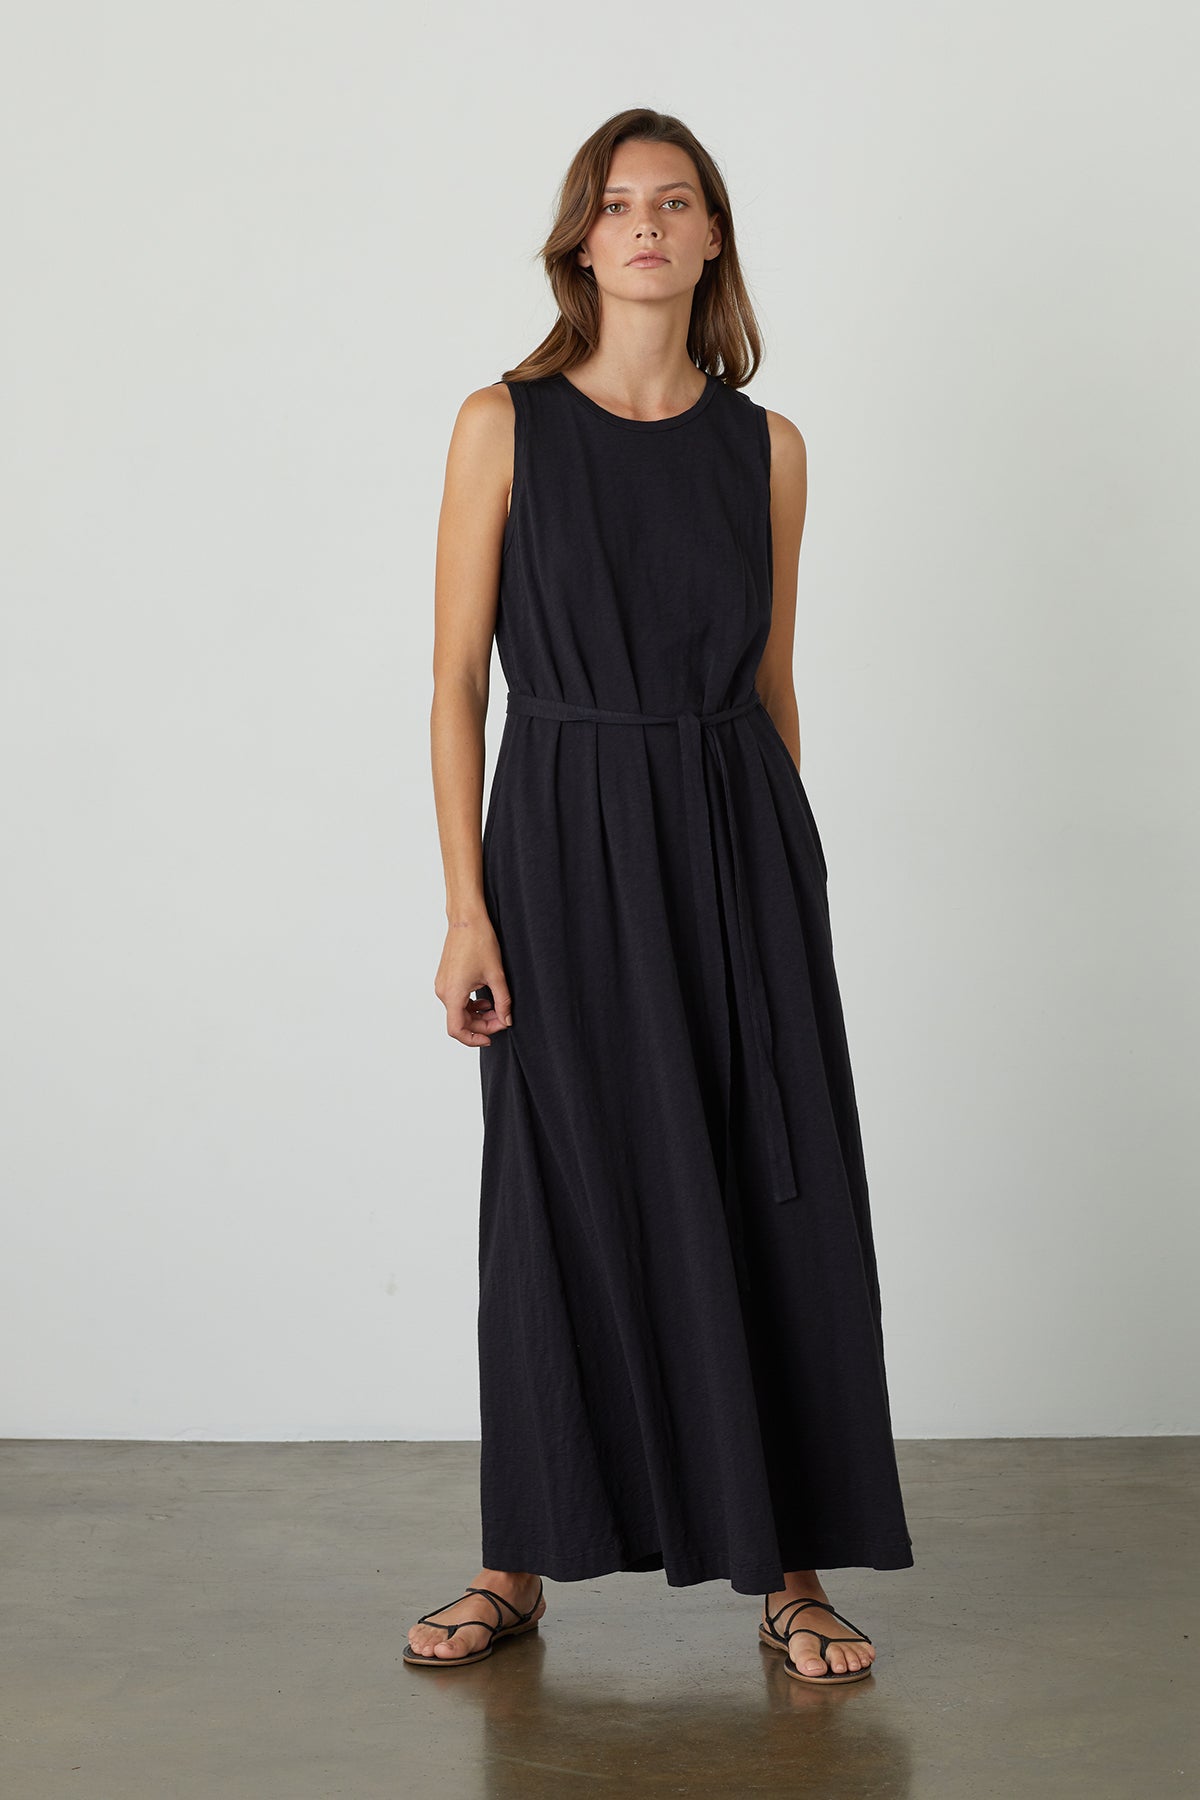   Edith Dress Black Front with Tie 